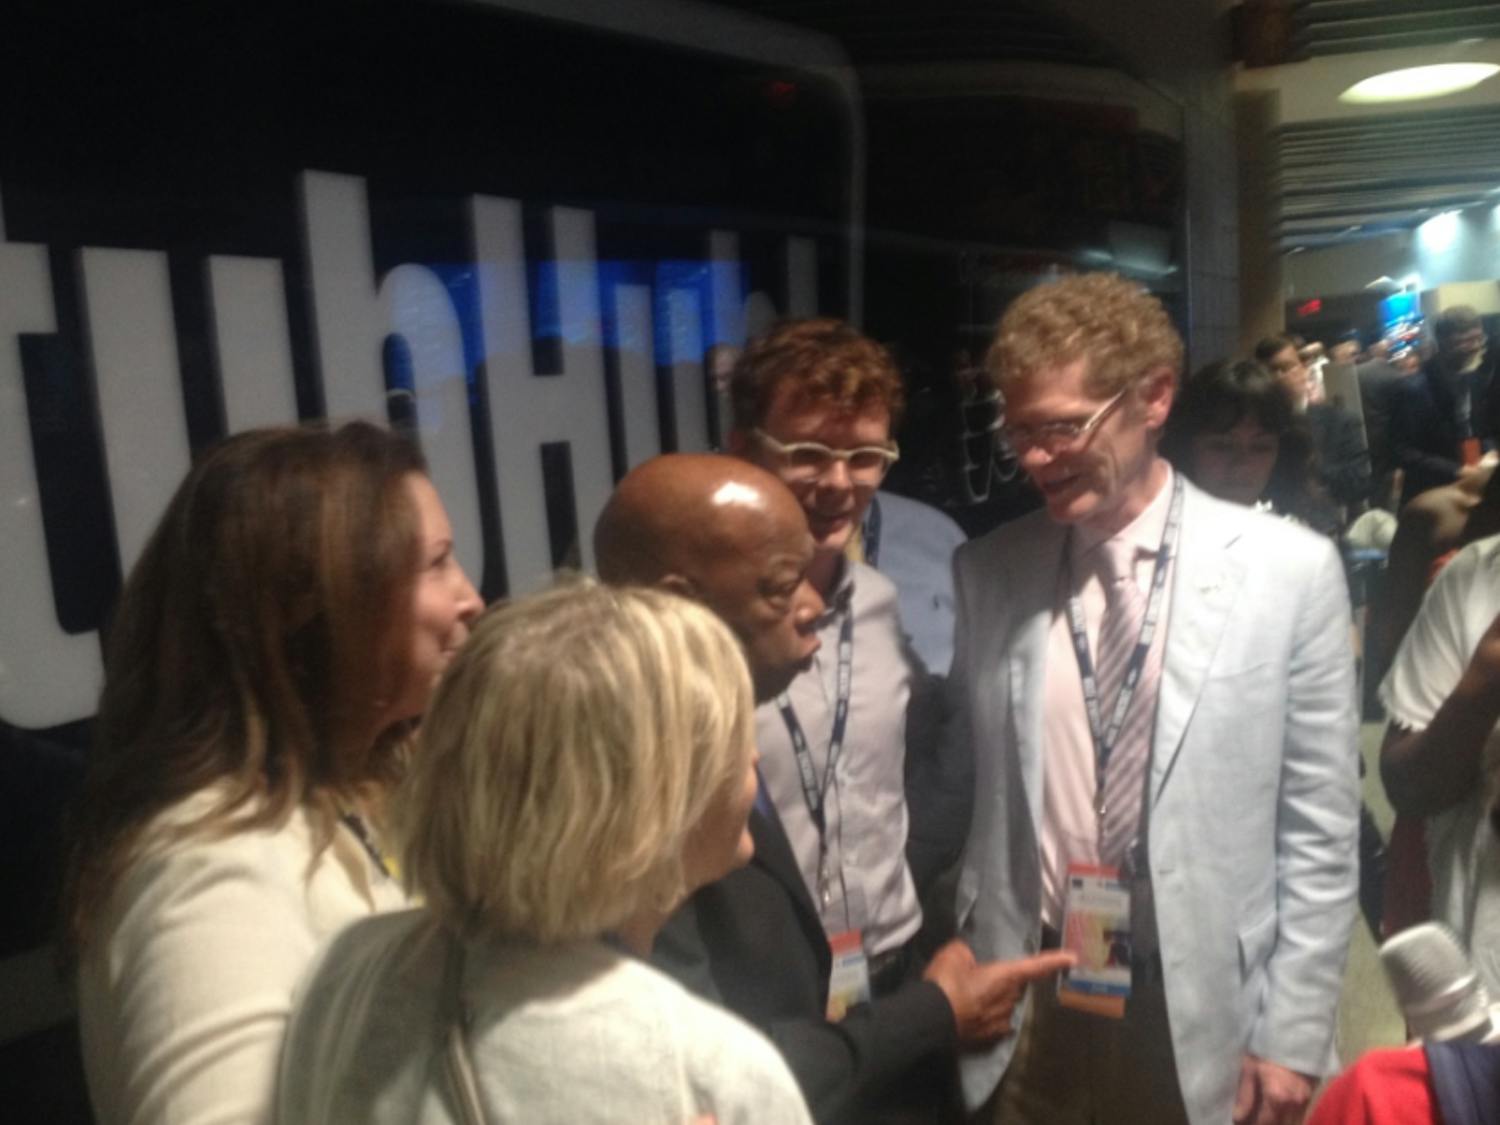 Georgia congressman and civil rights icon John Lewis talks with delegates inside the Wells Fargo Center during the Democratic National Convention in Philadelphia on July 27, 2016.